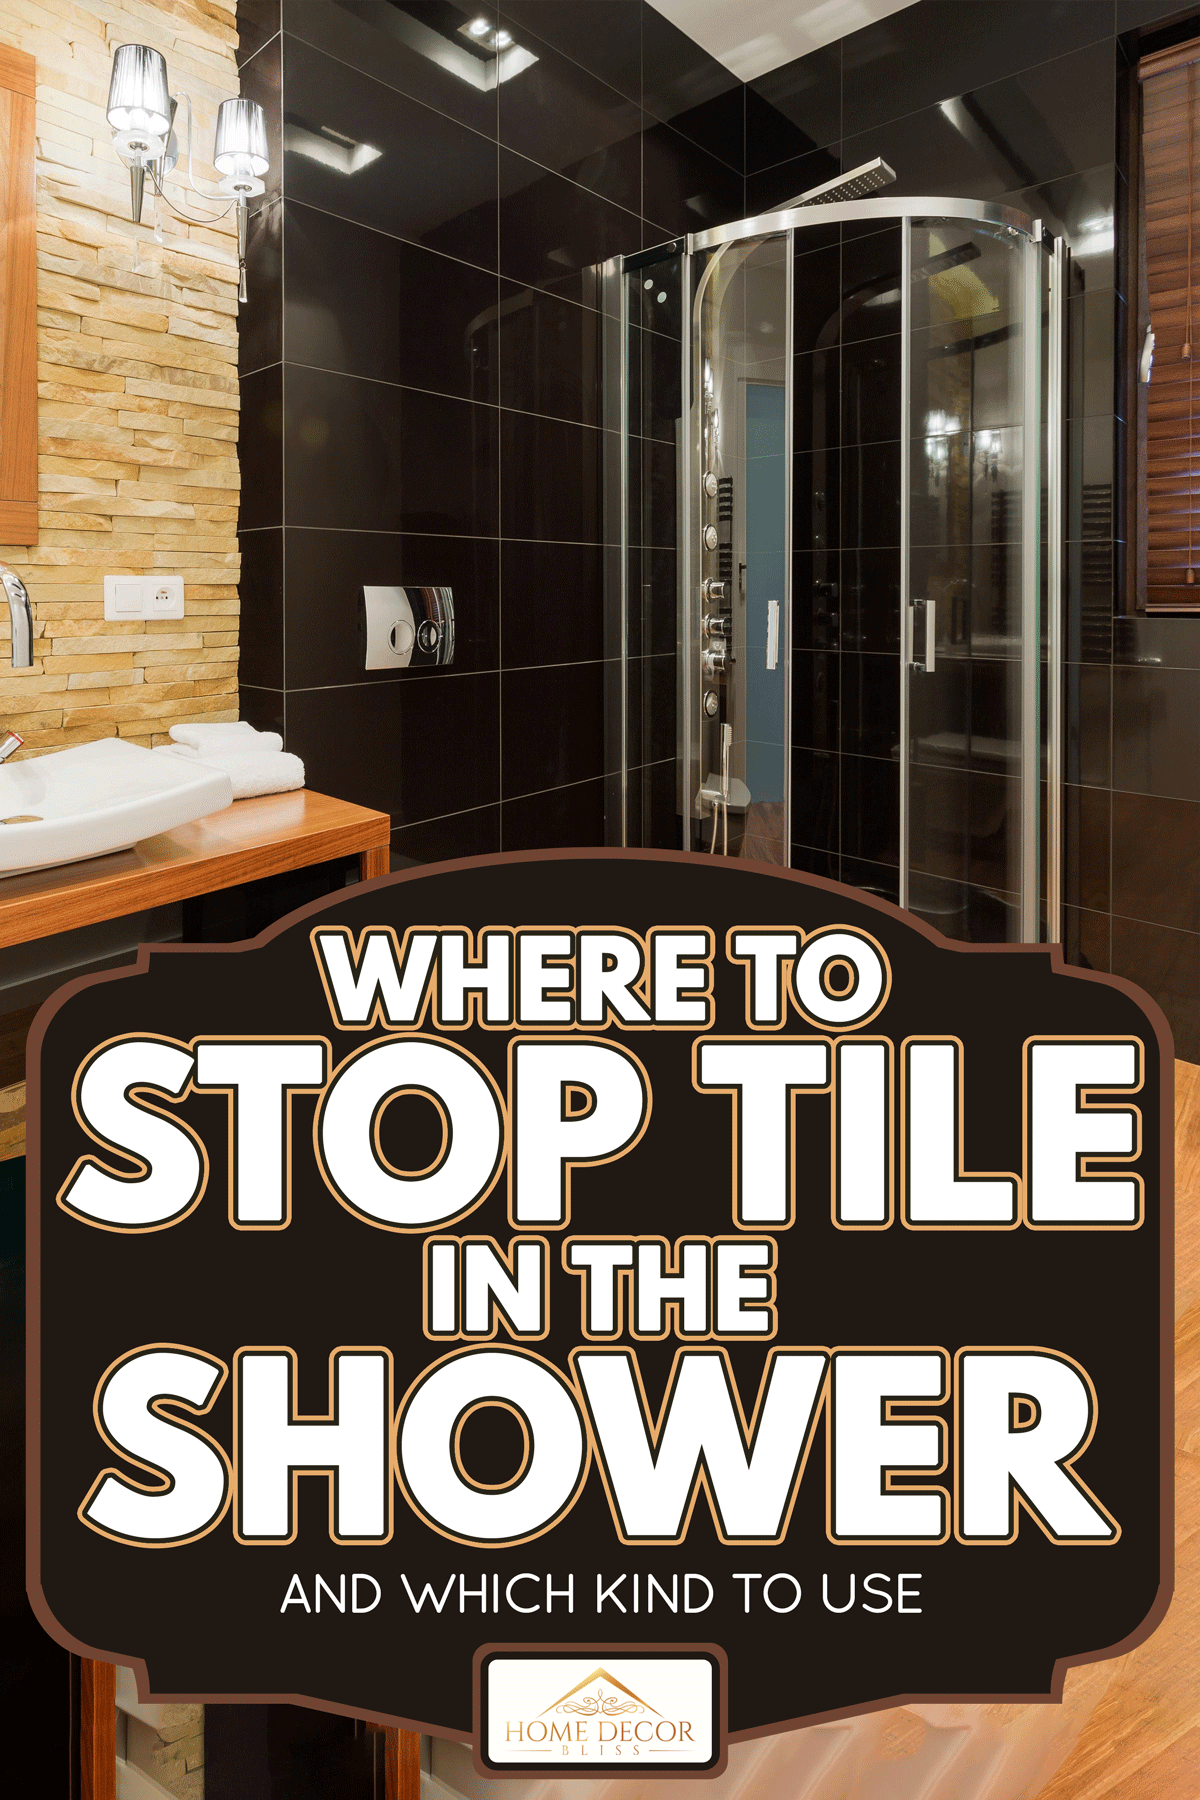 Extravagant decor of new bathroom with black tiles, Where To Stop Tile In The Shower [And Which Kind To Use]